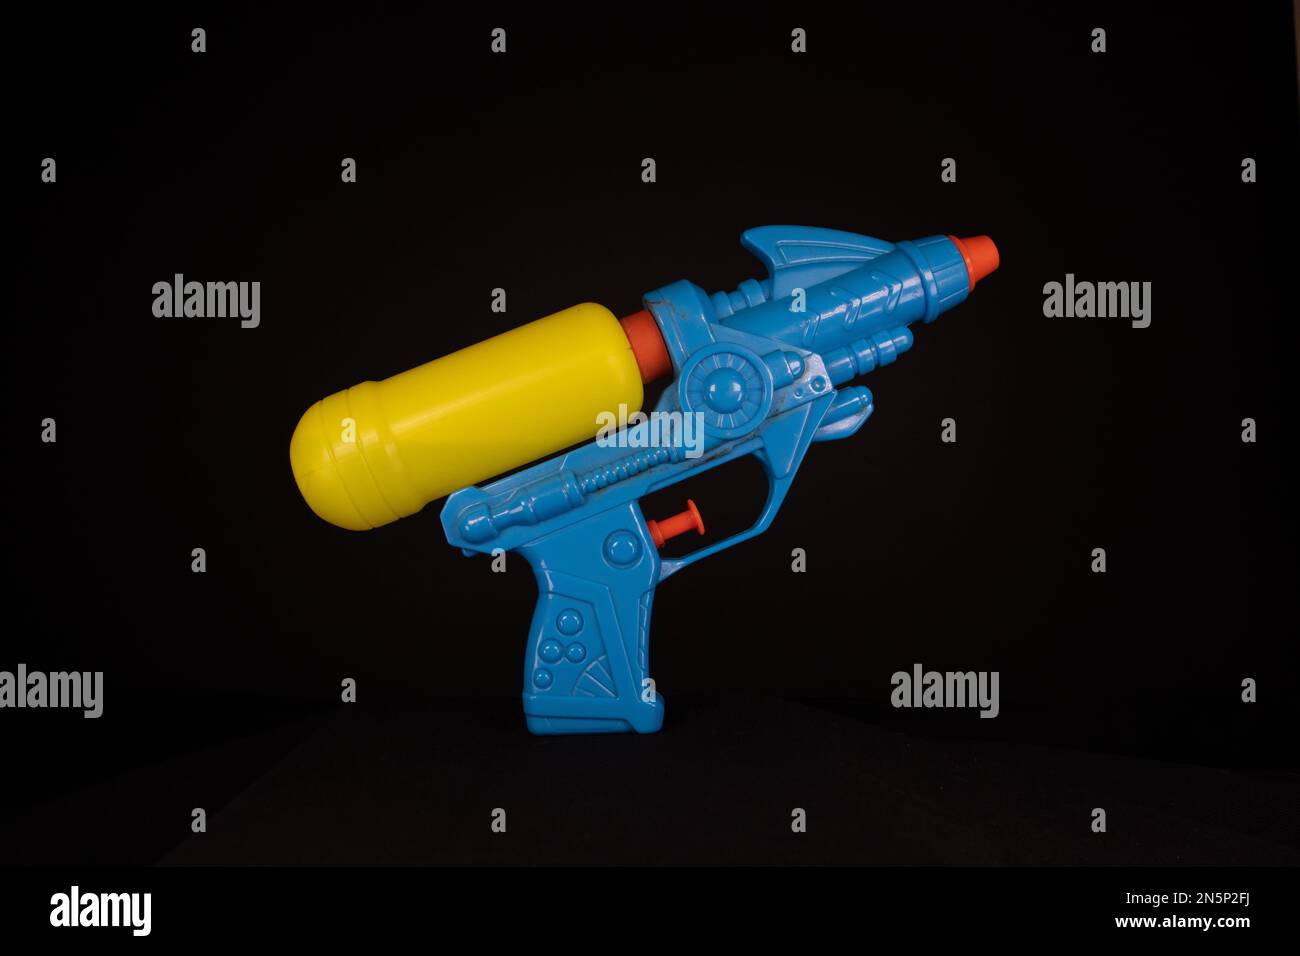 Blue and yellow children's plastic refillable water pistol isolated on a black background Stock Photo